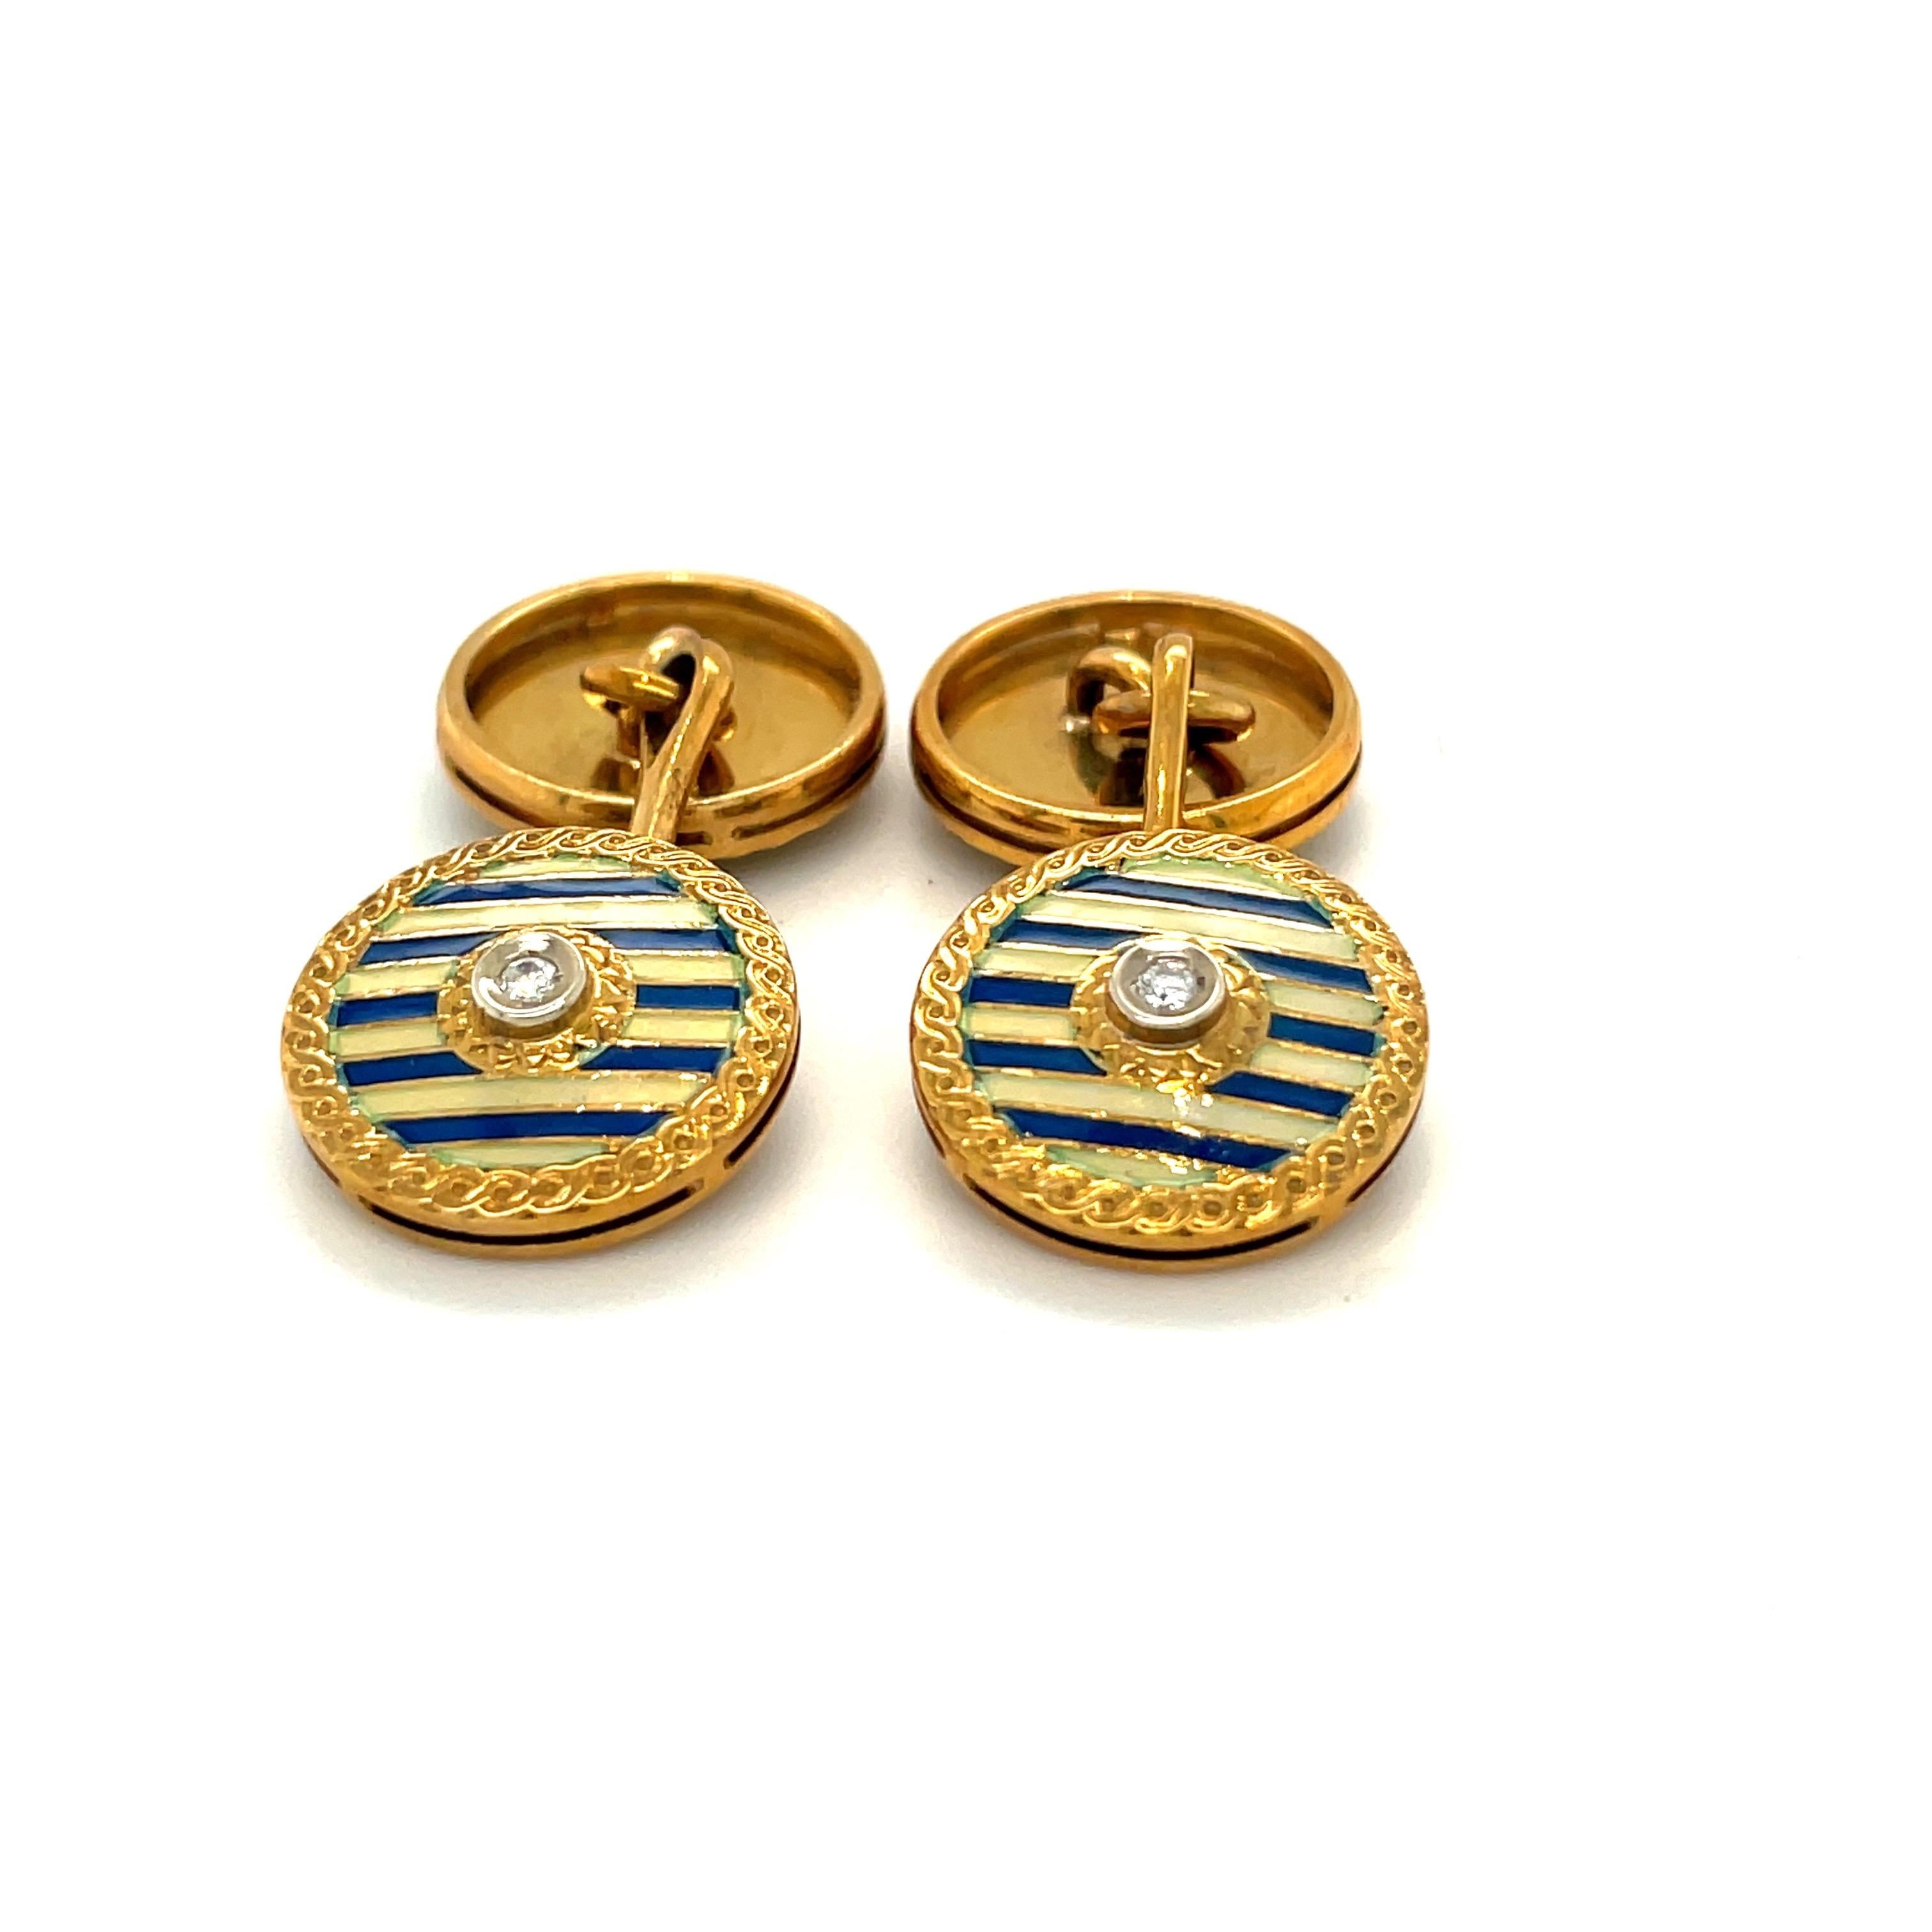 Classic 18 karat yellow gold and enamel cuff links. The 14 mm round cuff links are crafted with a blue and cream striped enamel. A round diamond centers each of the 4 rounds.
Total diamond weight 0.10 carats